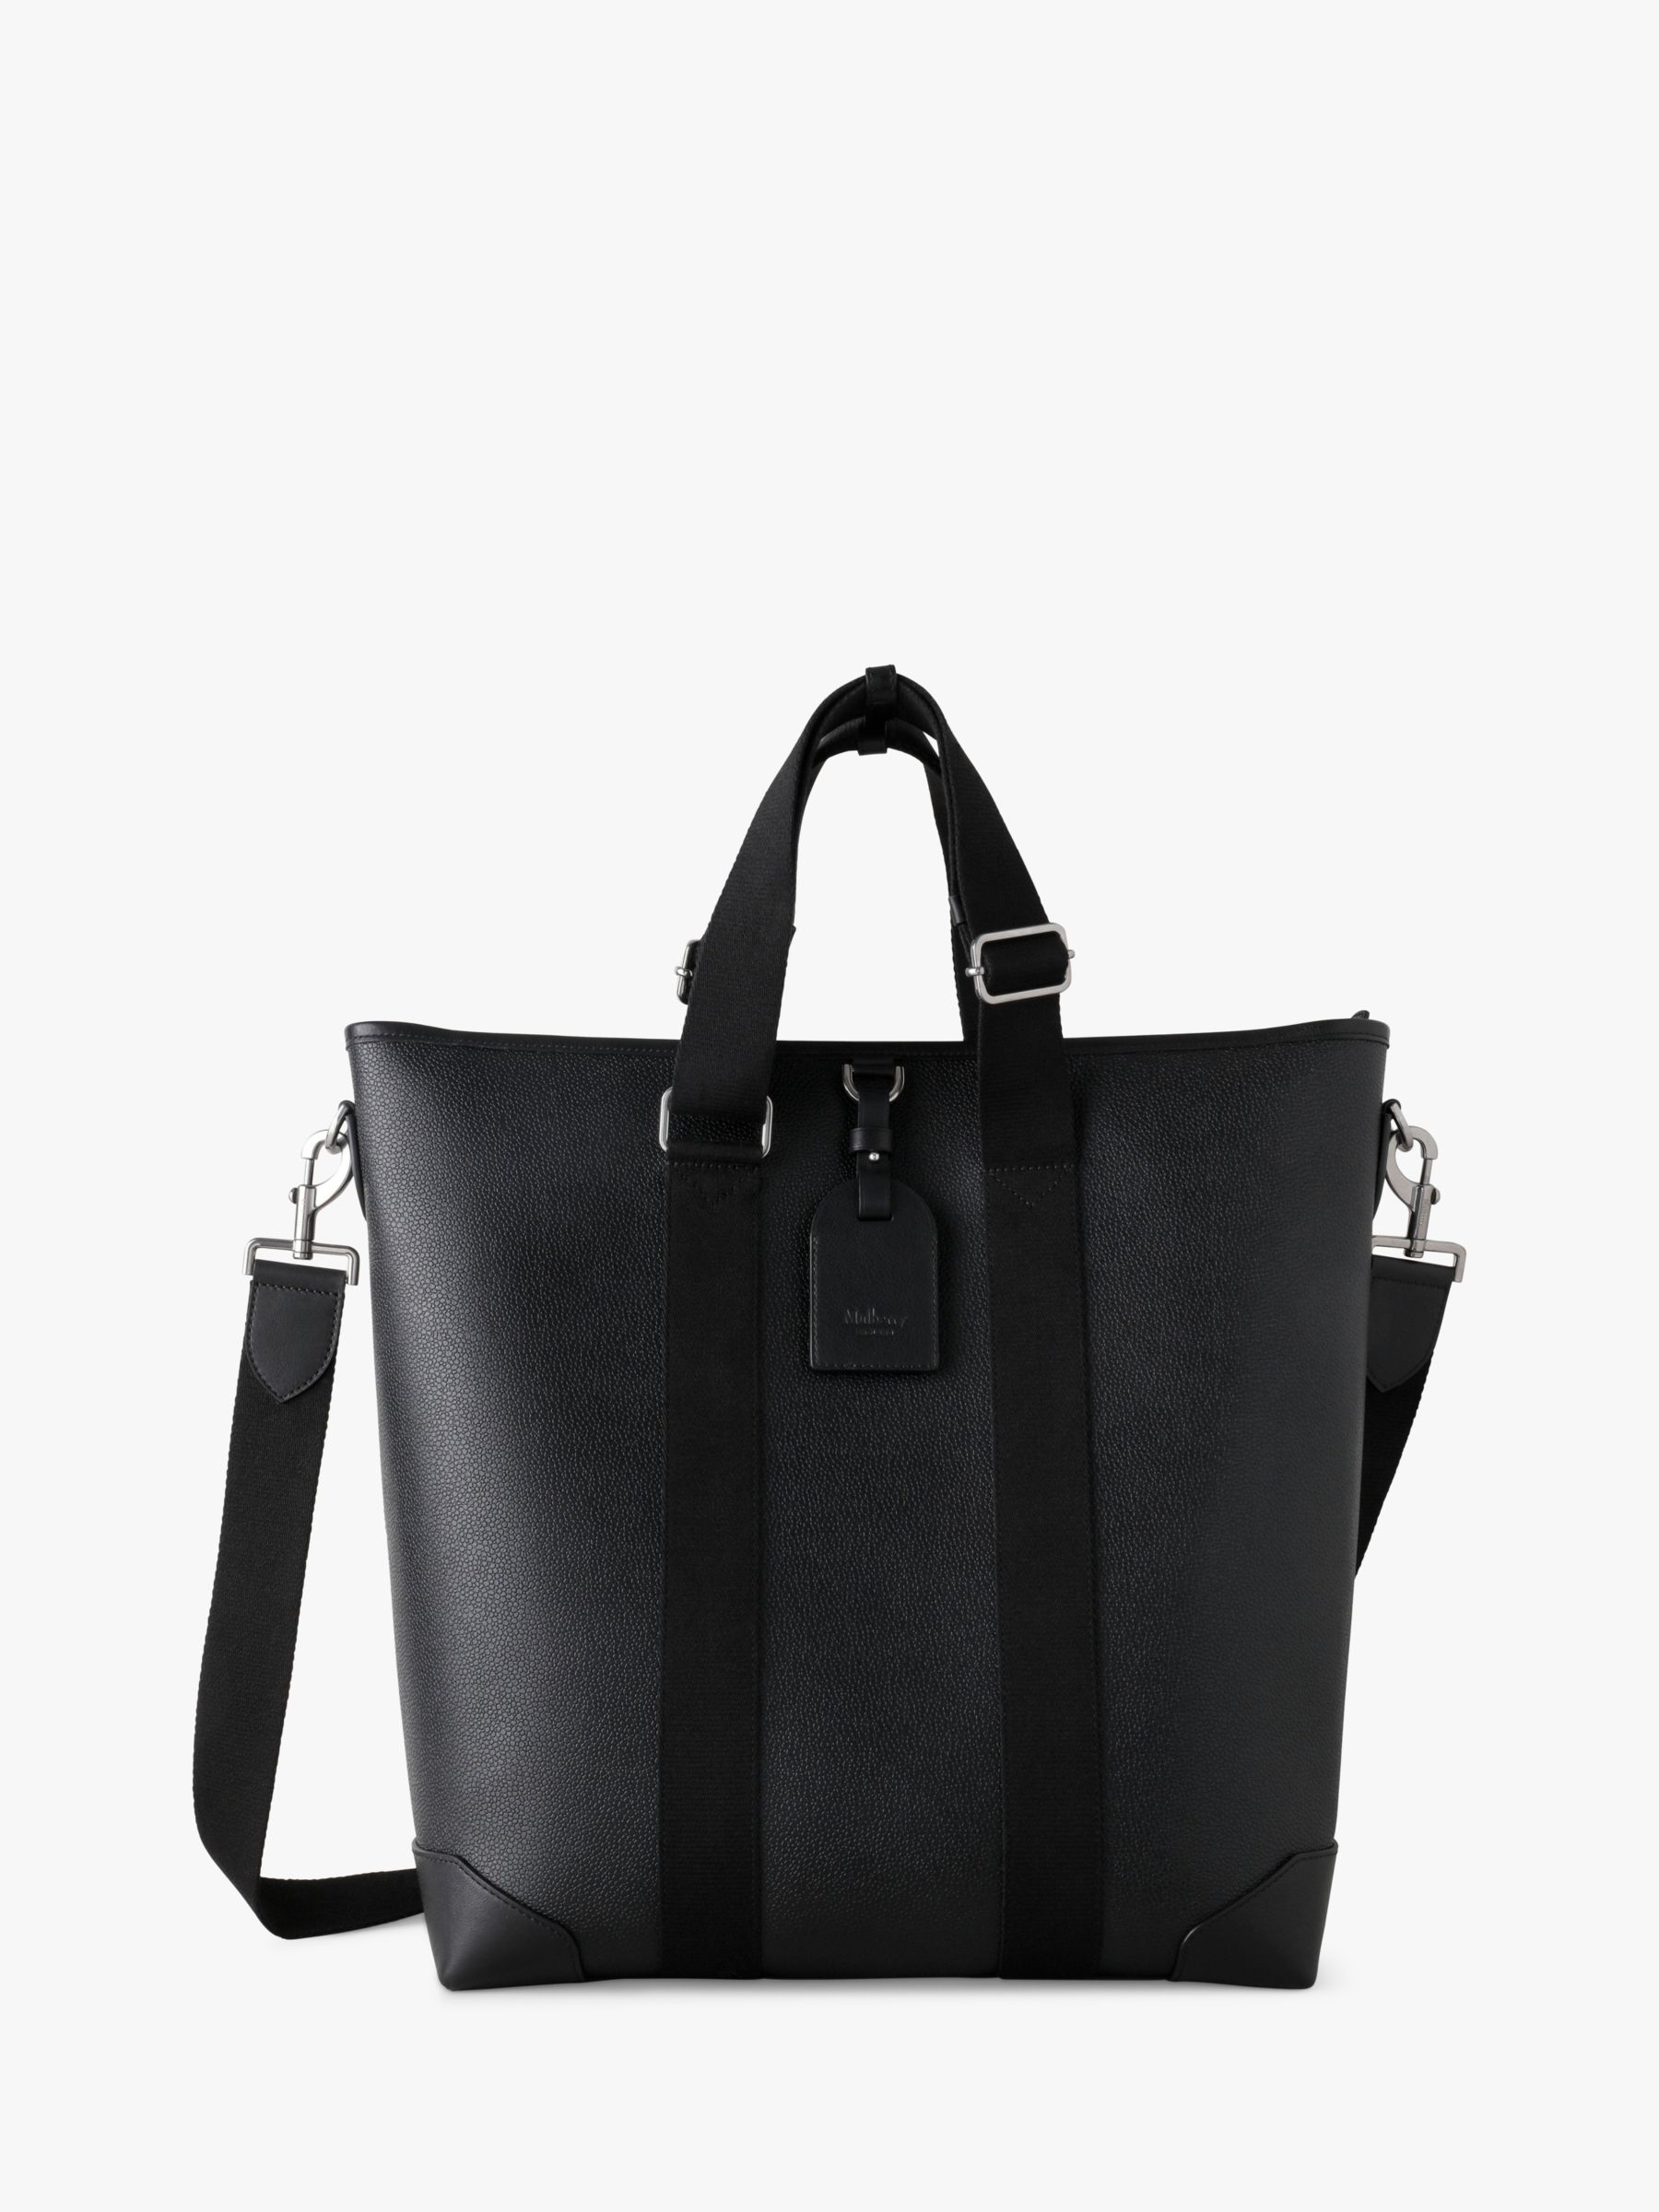 Mulberry Heritage Clipper Eco Scotchgrain Tote Bag at John Lewis & Partners